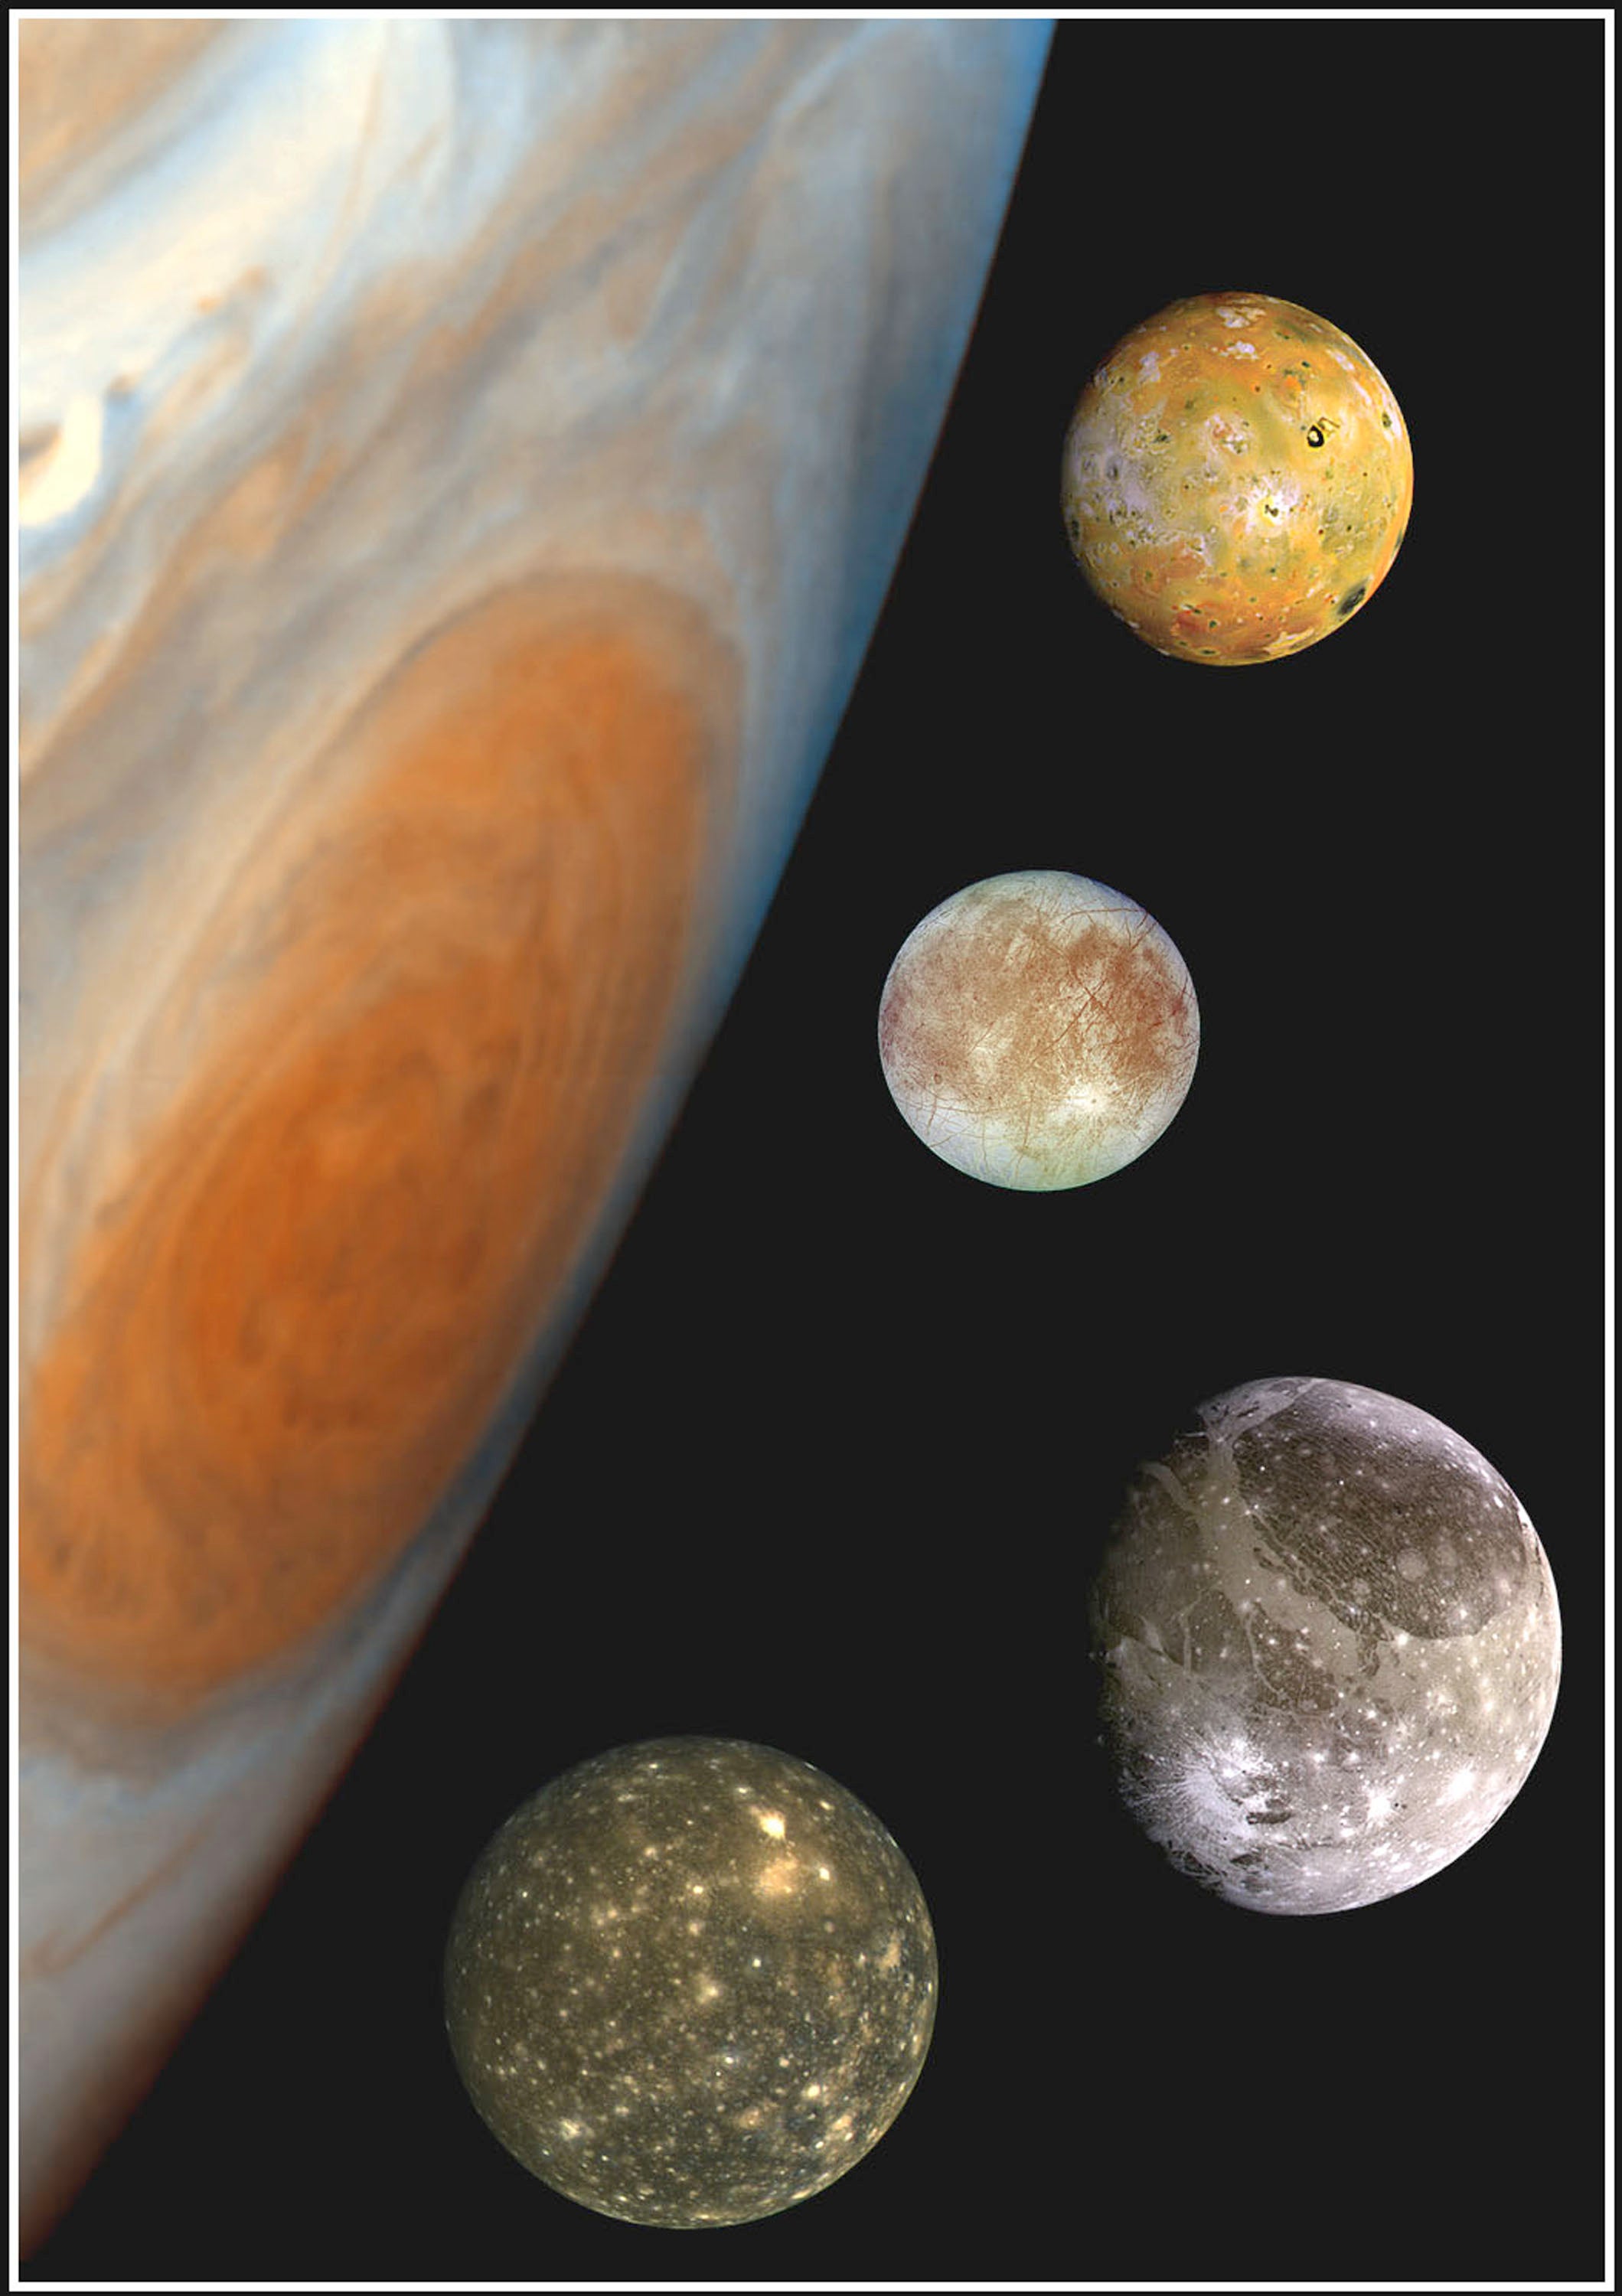 Jupiter and its Galilean satellites (top to bottom): Io, Europa, Ganymede, and Callisto. (Image: NASA/Newsmakers, Getty Images)